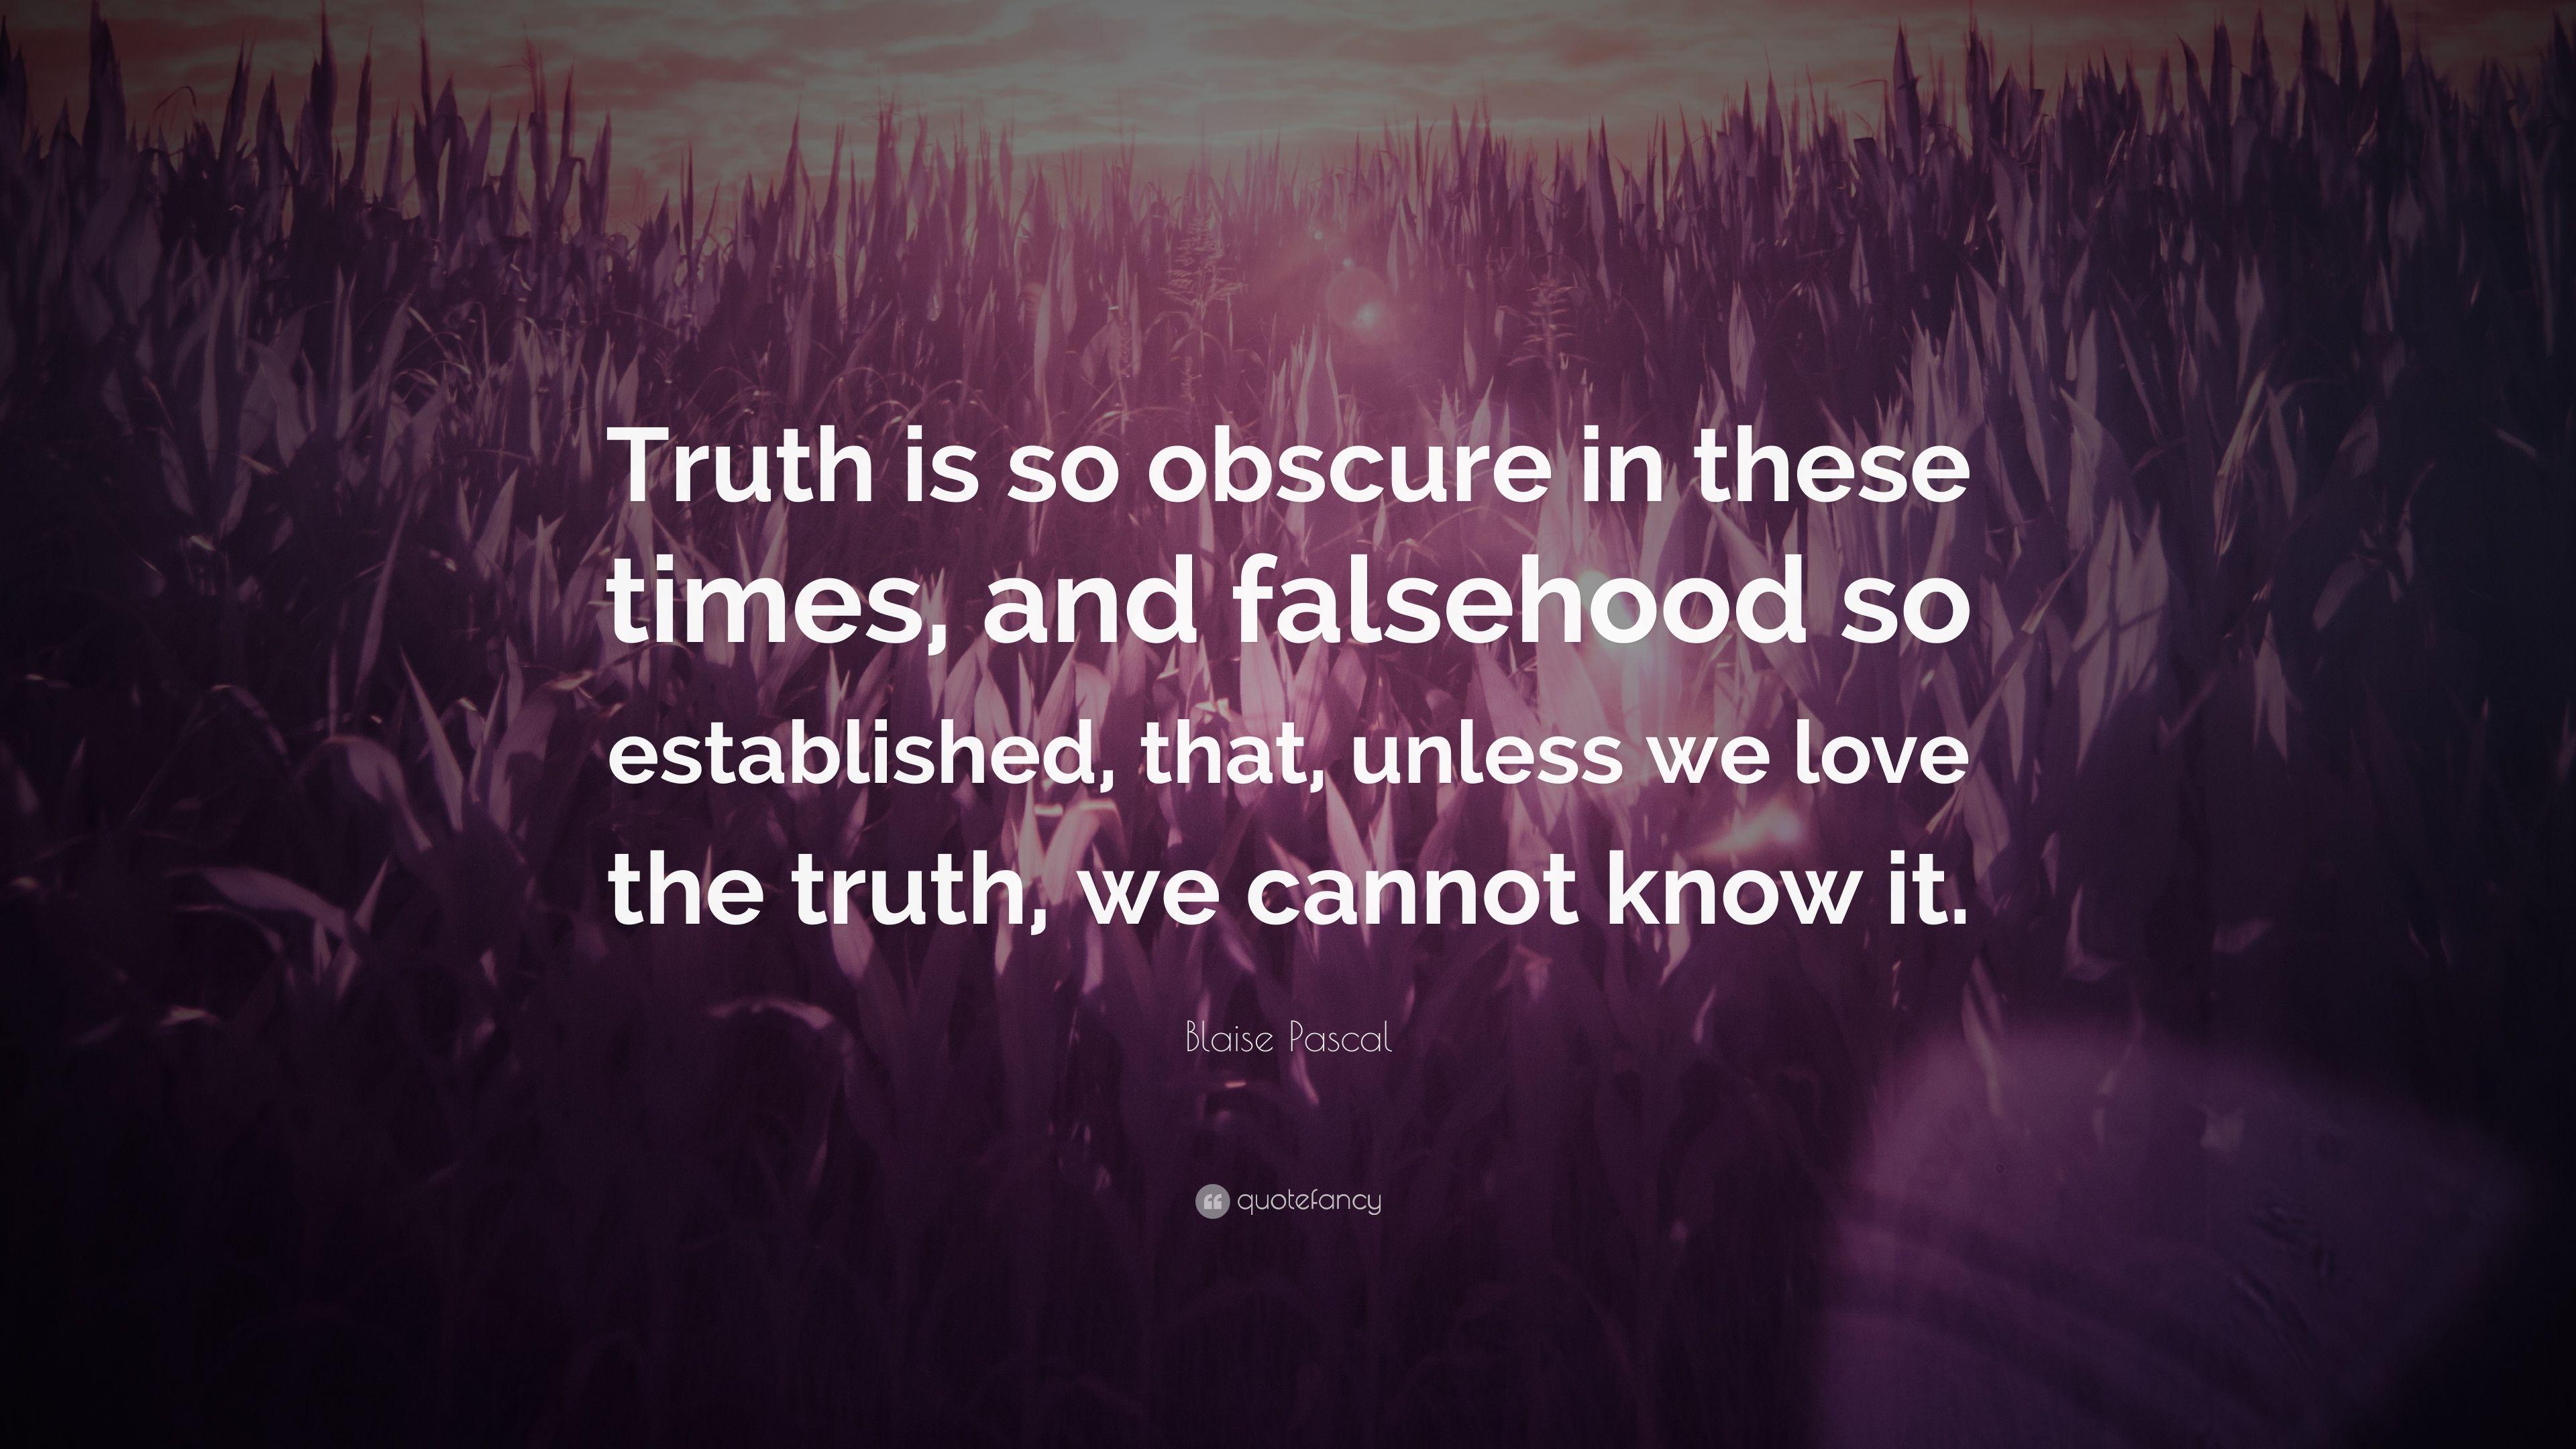 Blaise Pascal Quote: “Truth is so obscure in these times